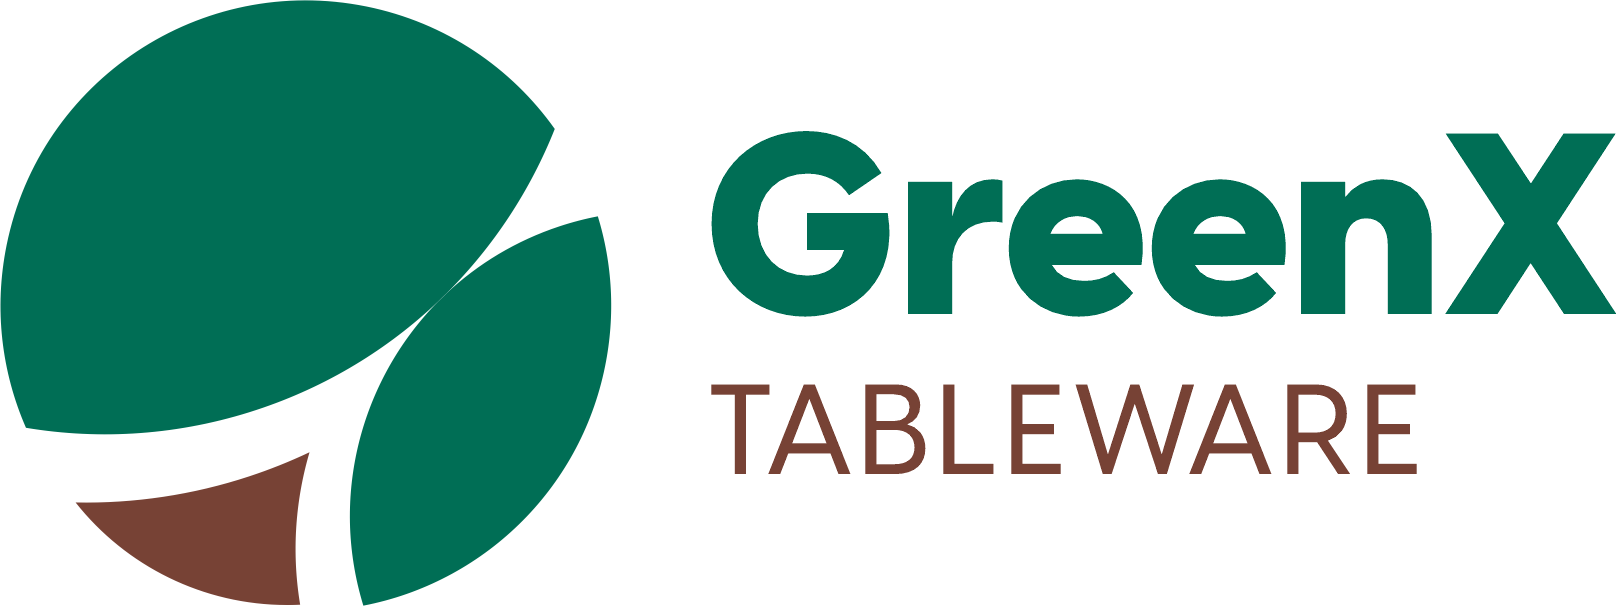 Greenx Tableware | Biodegradable Tableware Products Manufacturers in India